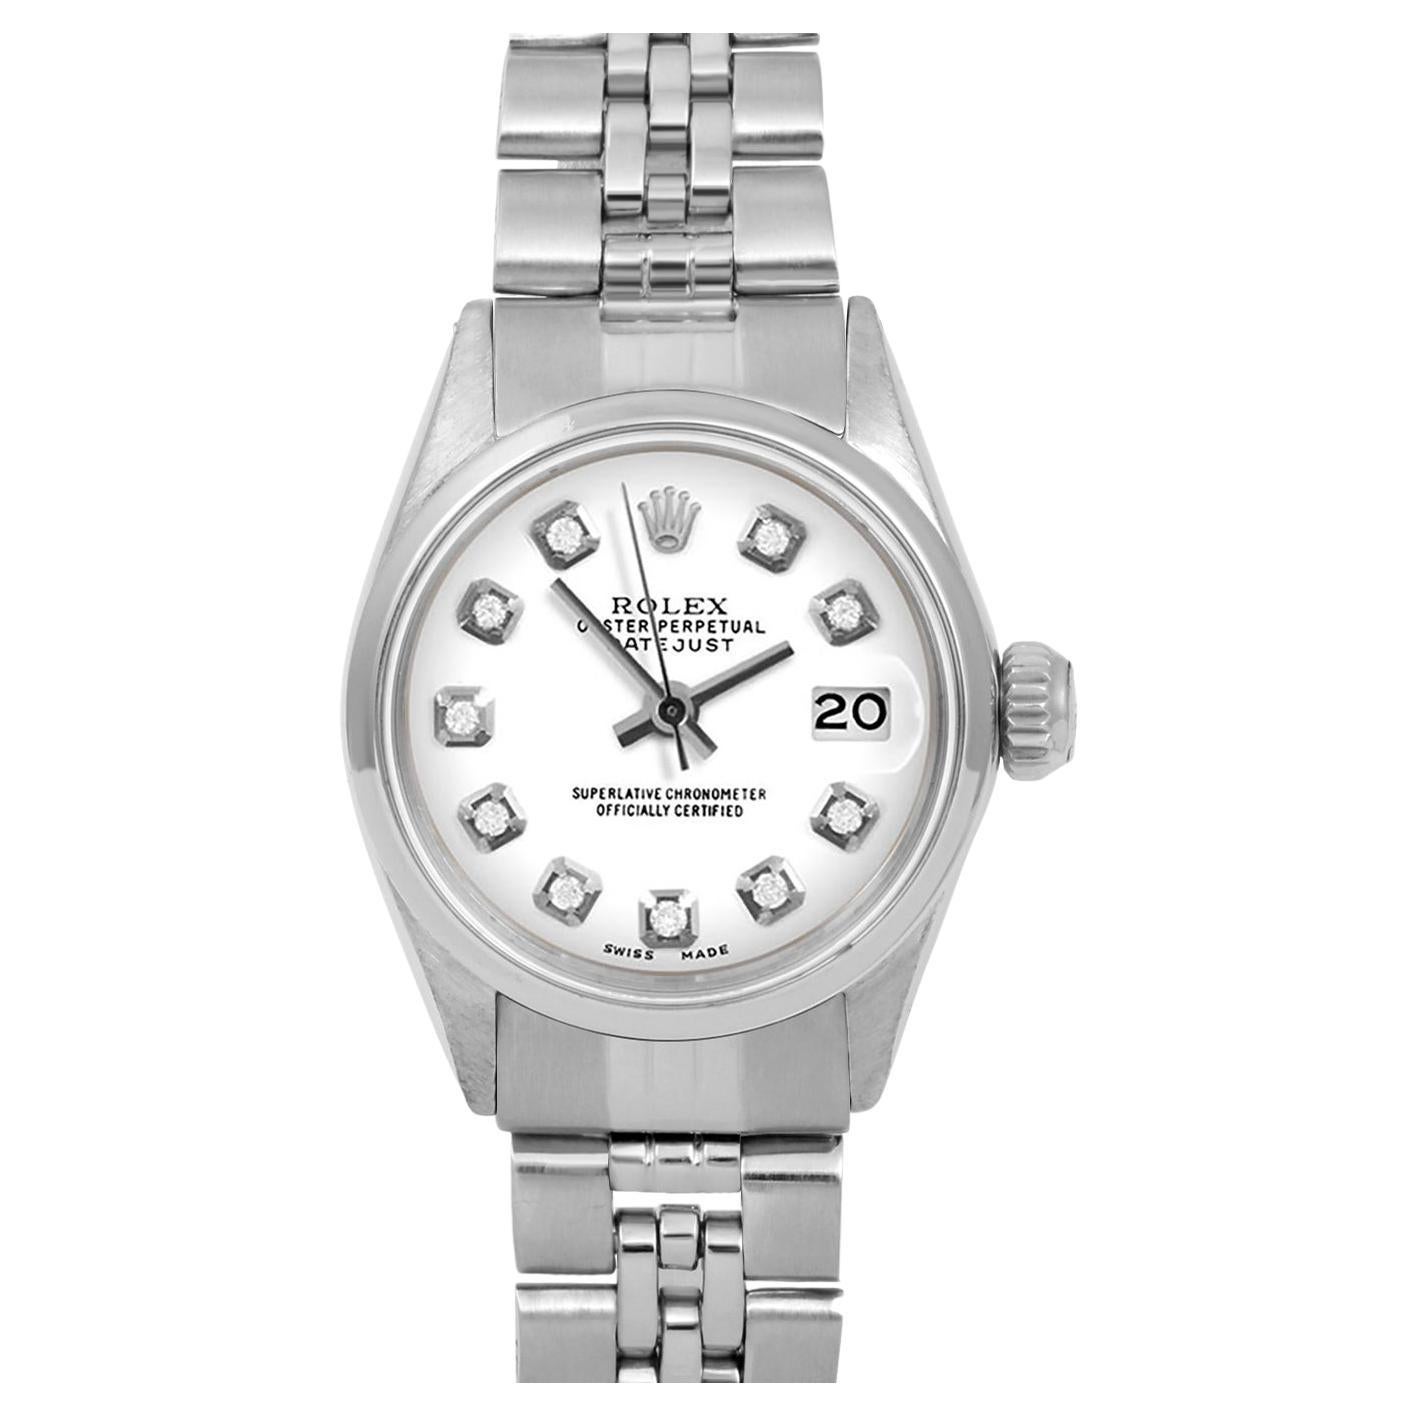 Rolex Ladies Ss Datejust White Diamond Dial Smooth Bezel Jubilee Band Watch For Sale